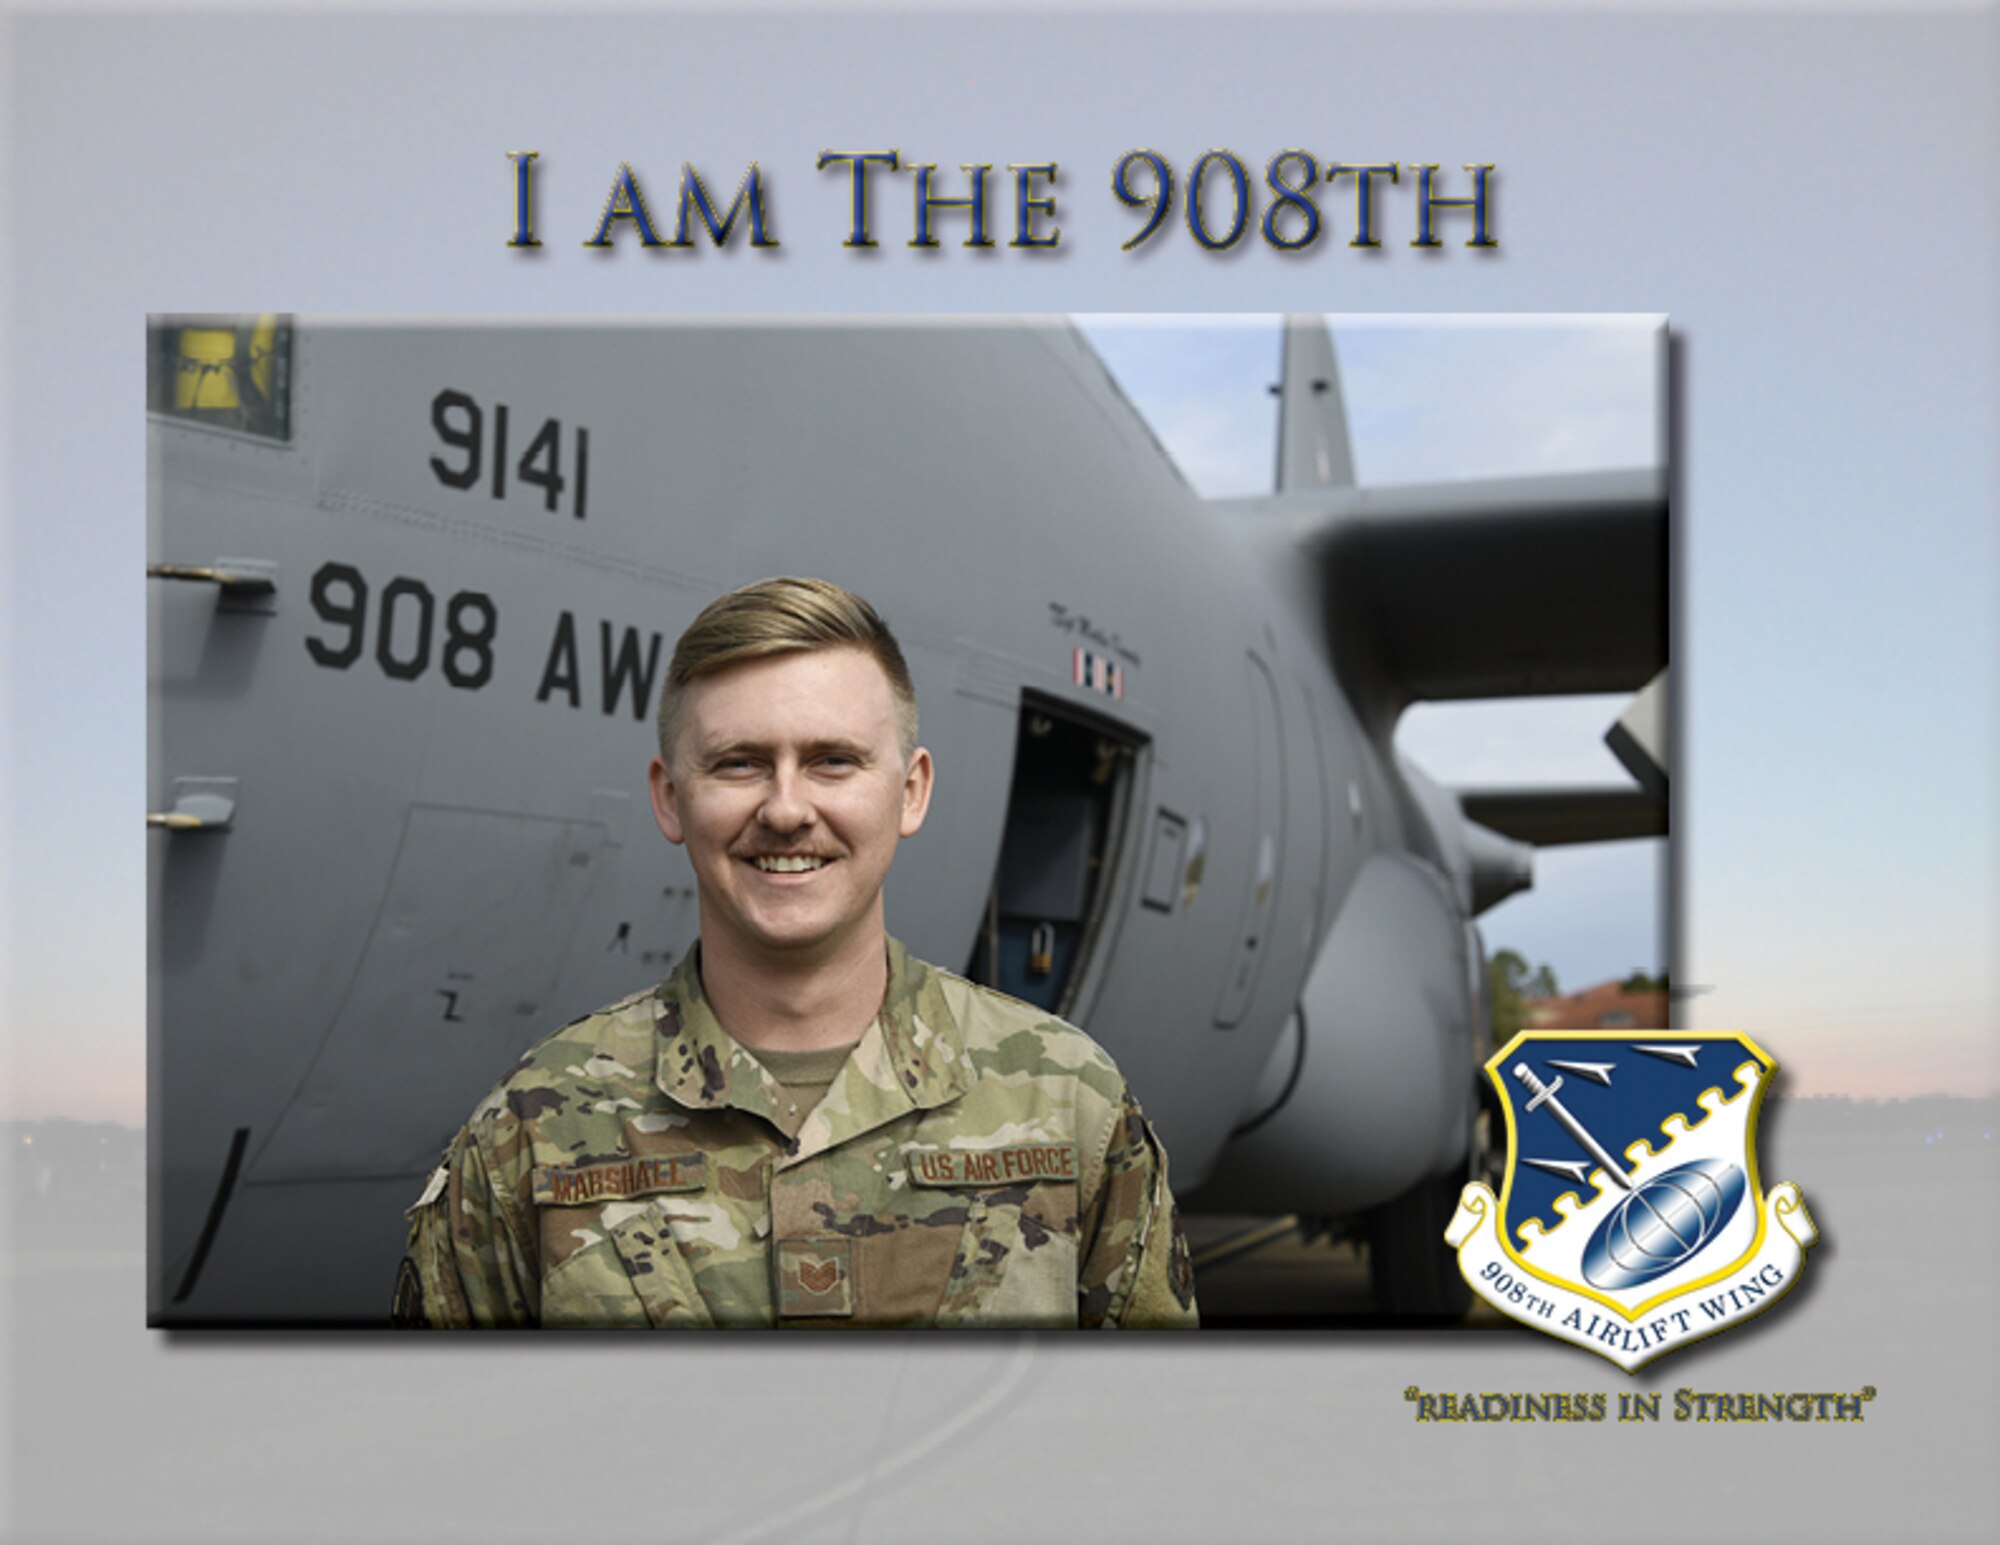 Technical Sgt. Matthew Marshall is a crew chief with the 908th Aircraft Maintenance Squadron